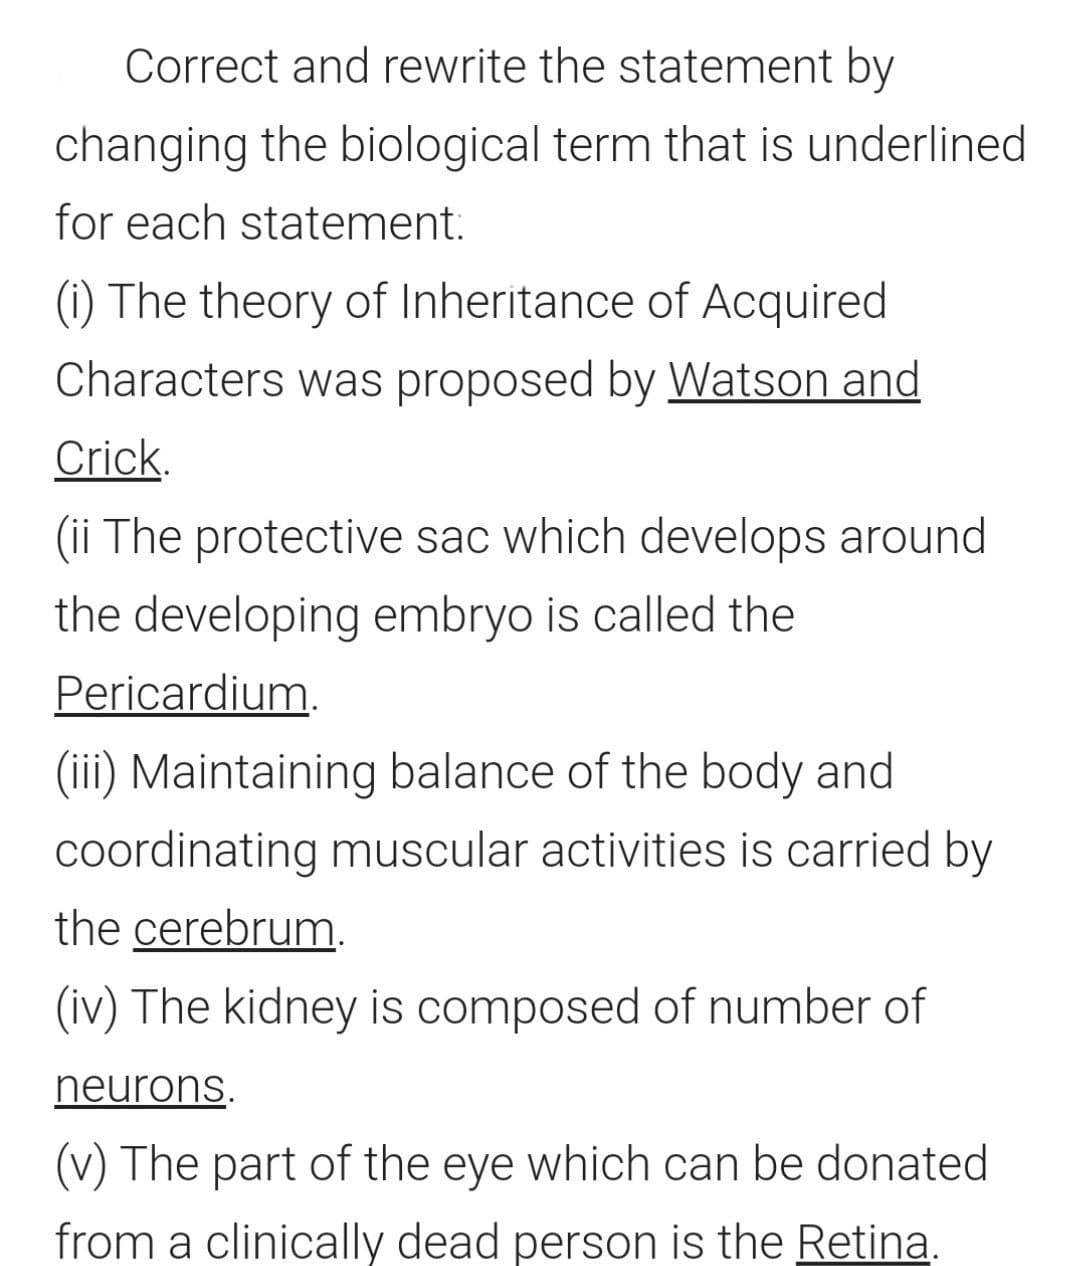 Correct and rewrite the statement by
changing the biological term that is underlined
for each statement:
(1) The theory of Inheritance of Acquired
Characters was proposed by Watson and
Crick.
(ii The protective sac which develops around
the developing embryo is called the
Pericardium.
(iii) Maintaining balance of the body and
coordinating muscular activities is carried by
the cerebrum.
(iv) The kidney is composed of number of
neurons.
(v) The part of the eye which can be donated
from a clinically dead person is the Retina.
